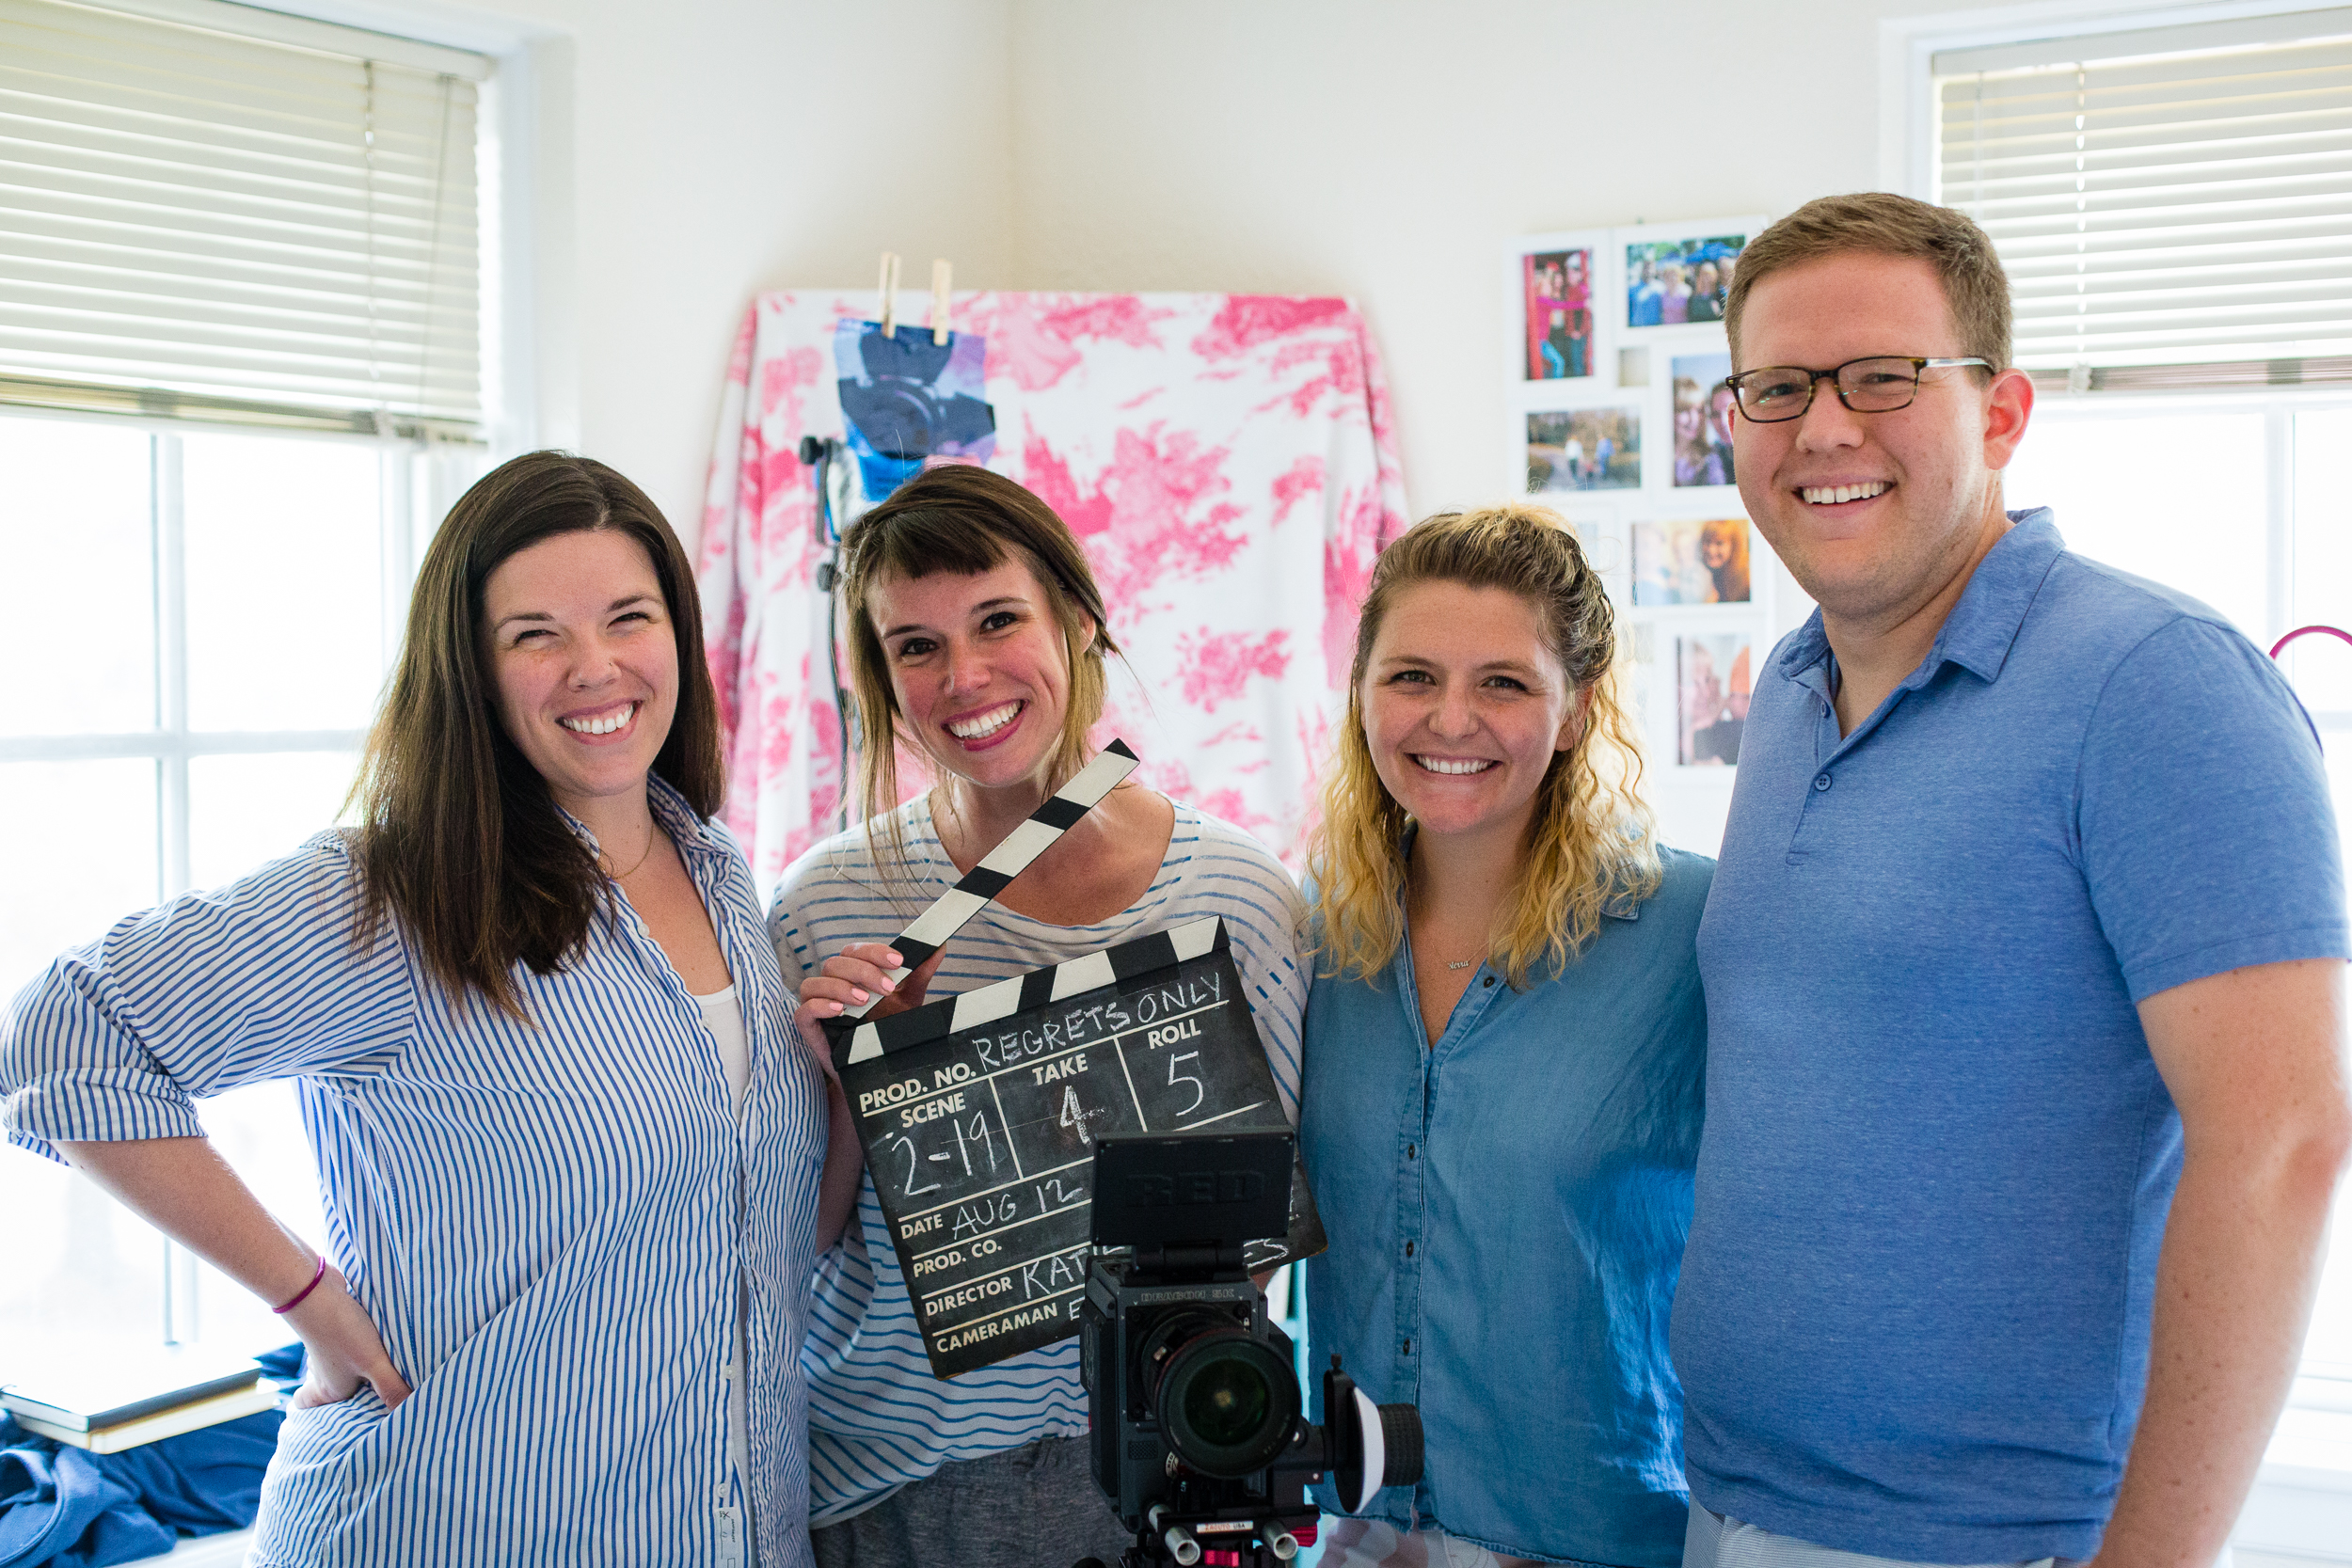 Day 4: Director/Editor Katie Stanley, Co-Creator/Writers Alice Stanley Jr. and Sierra Carter, and Producer Eric Dern.